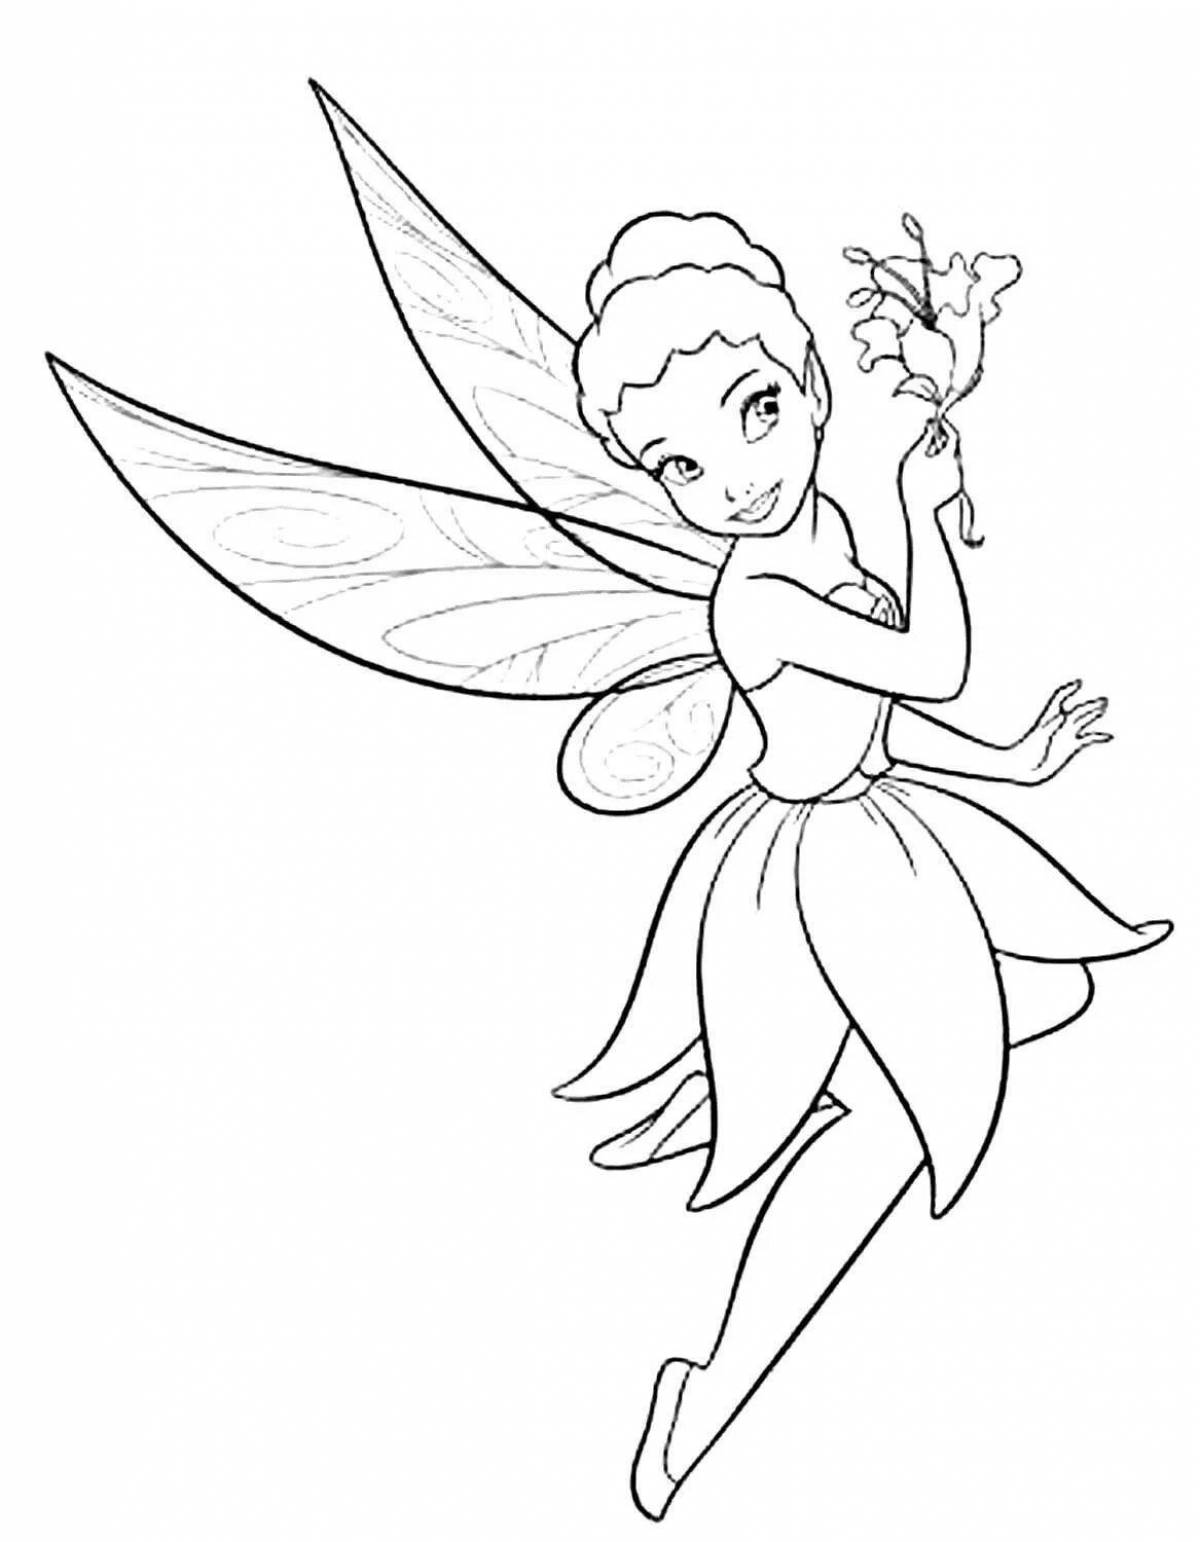 Cute fairy coloring pages for kids 5-6 years old